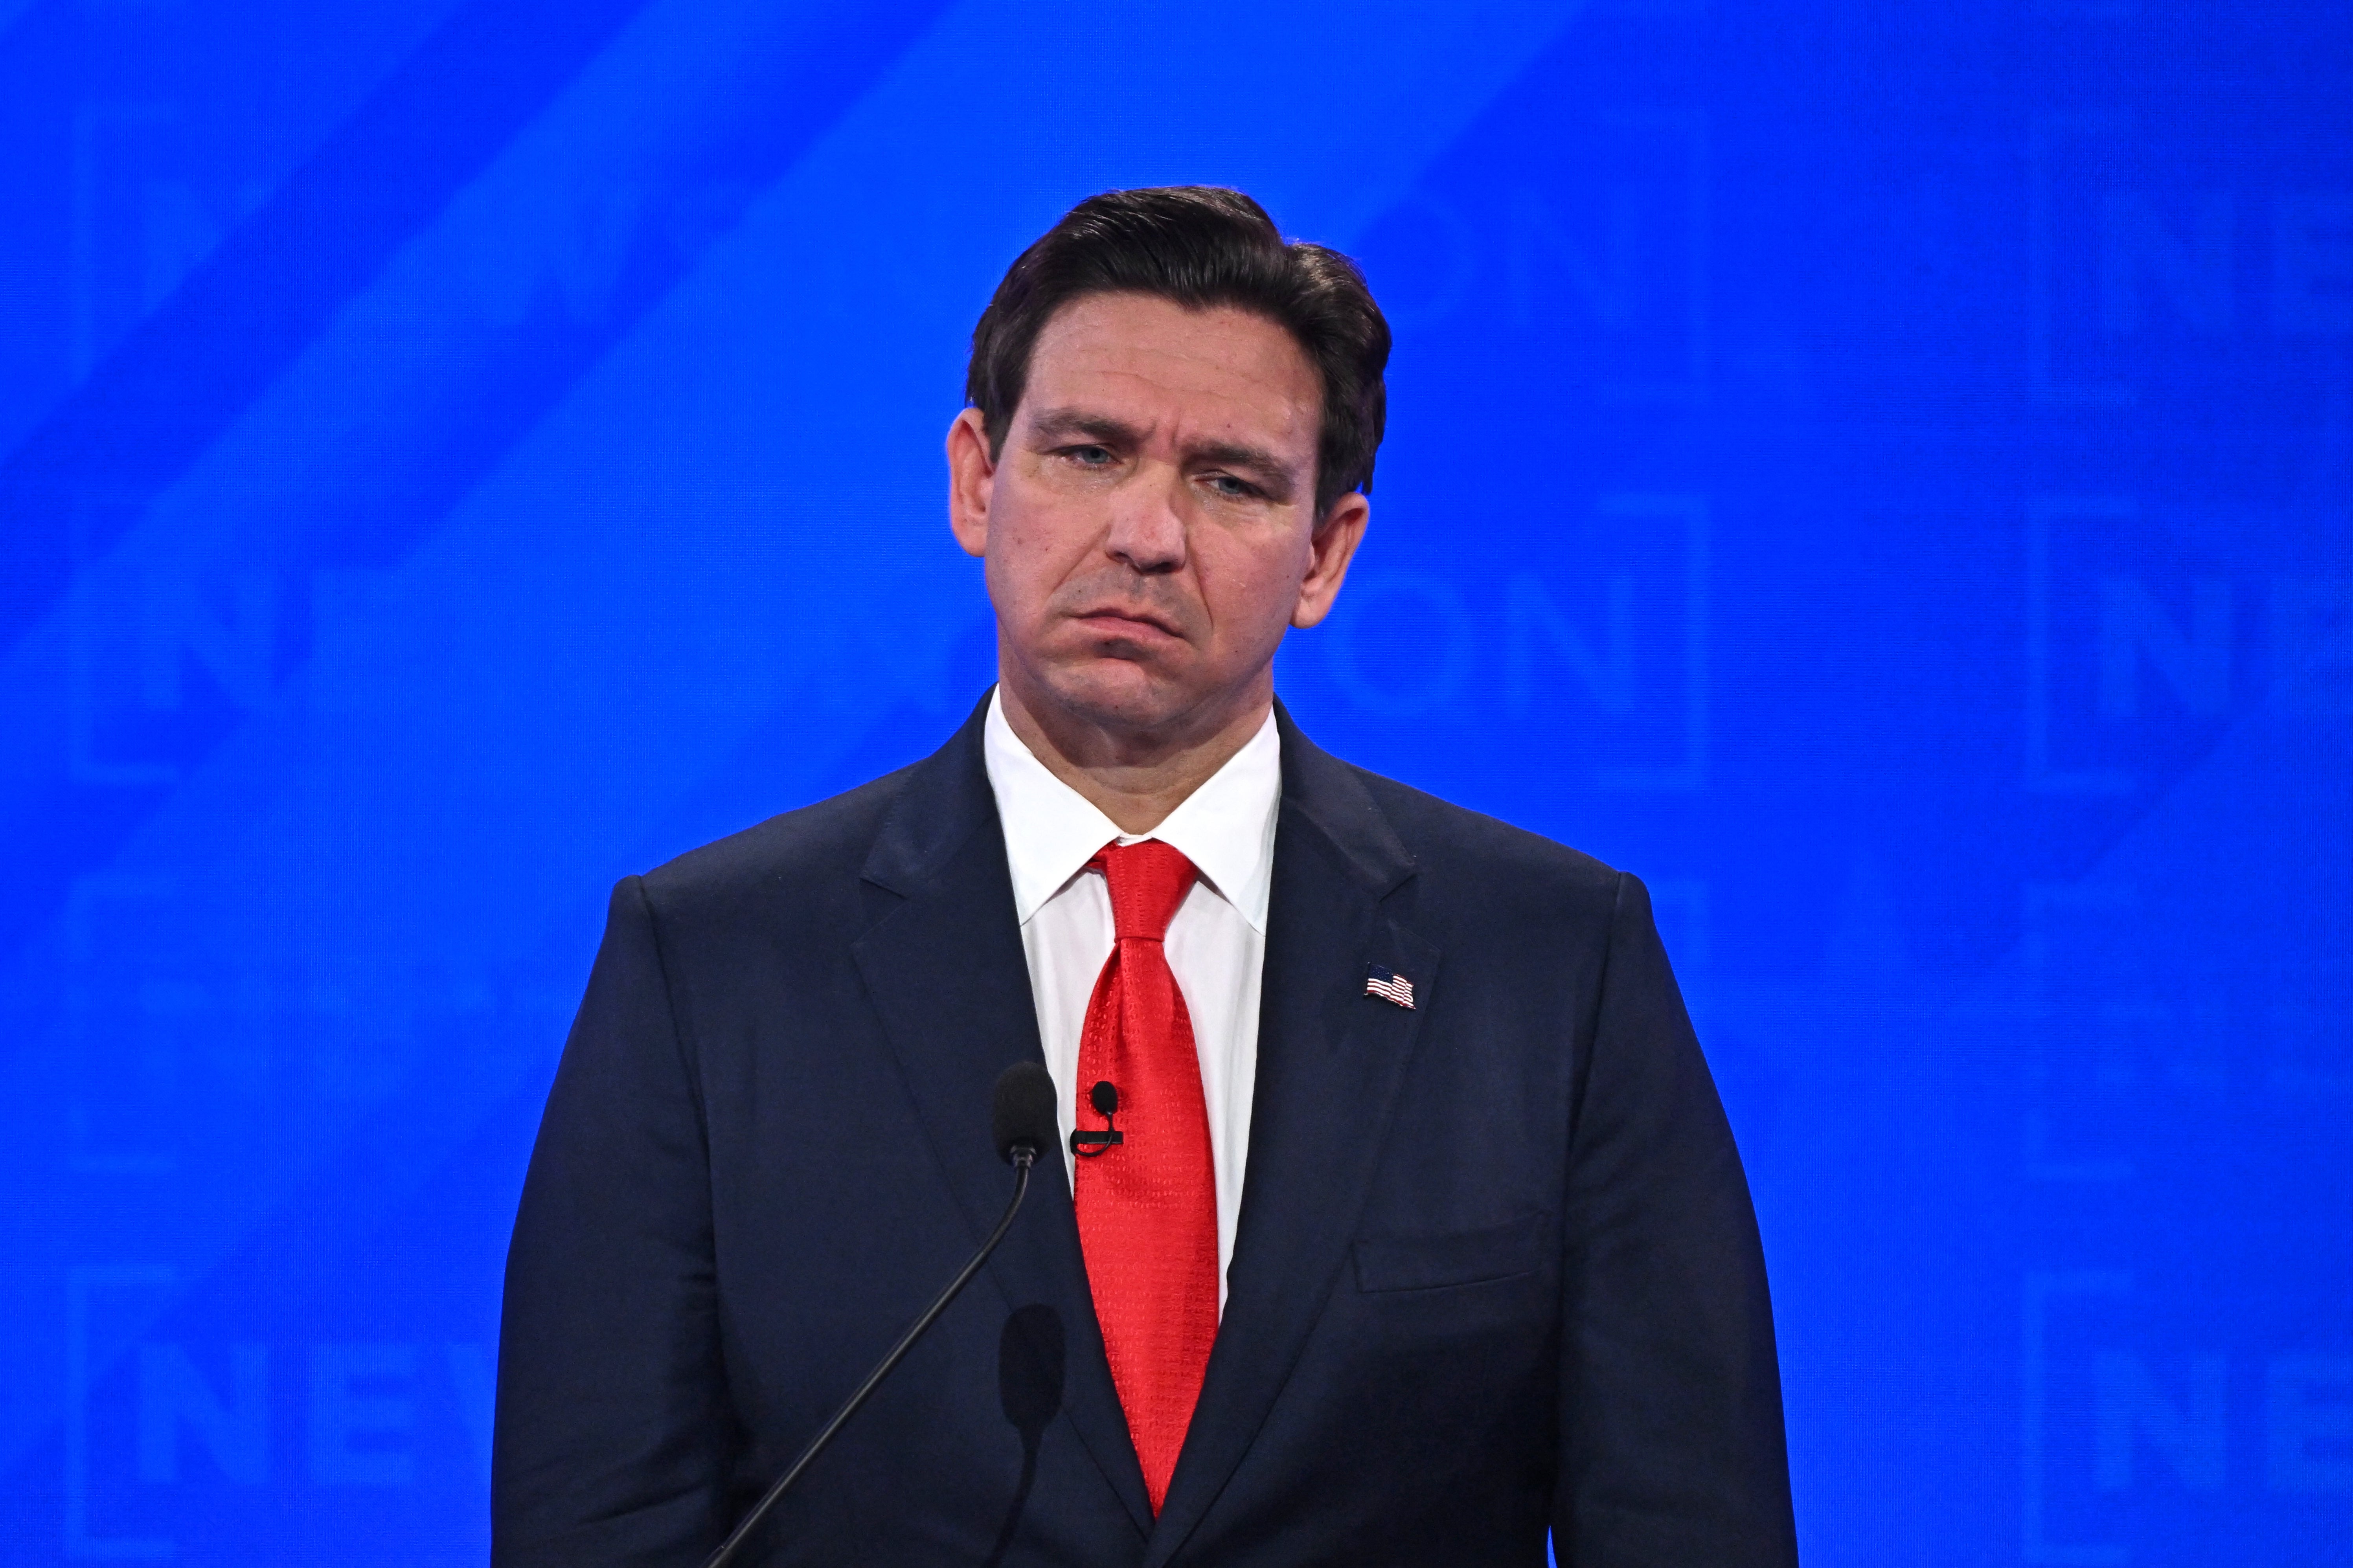 Florida Governor Ron DeSantis looks on during the fourth Republican presidential primary debate at the University of Alabama in Tuscaloosa, Alabama